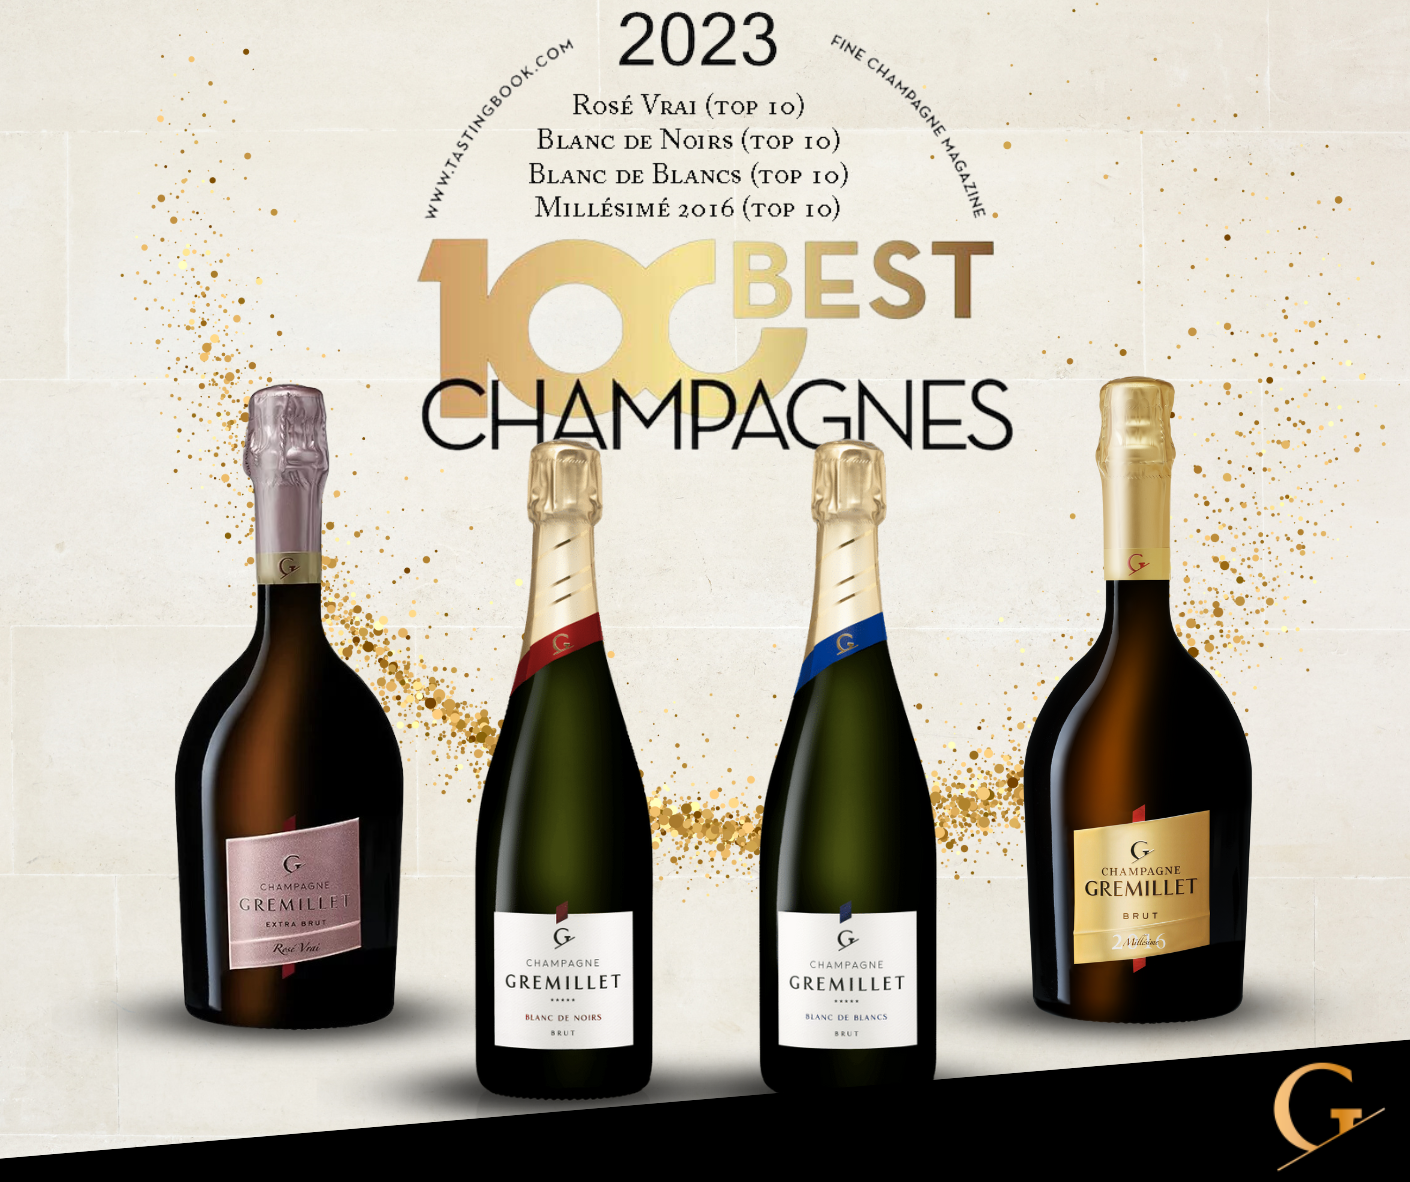 100 Best Champagnes 2023